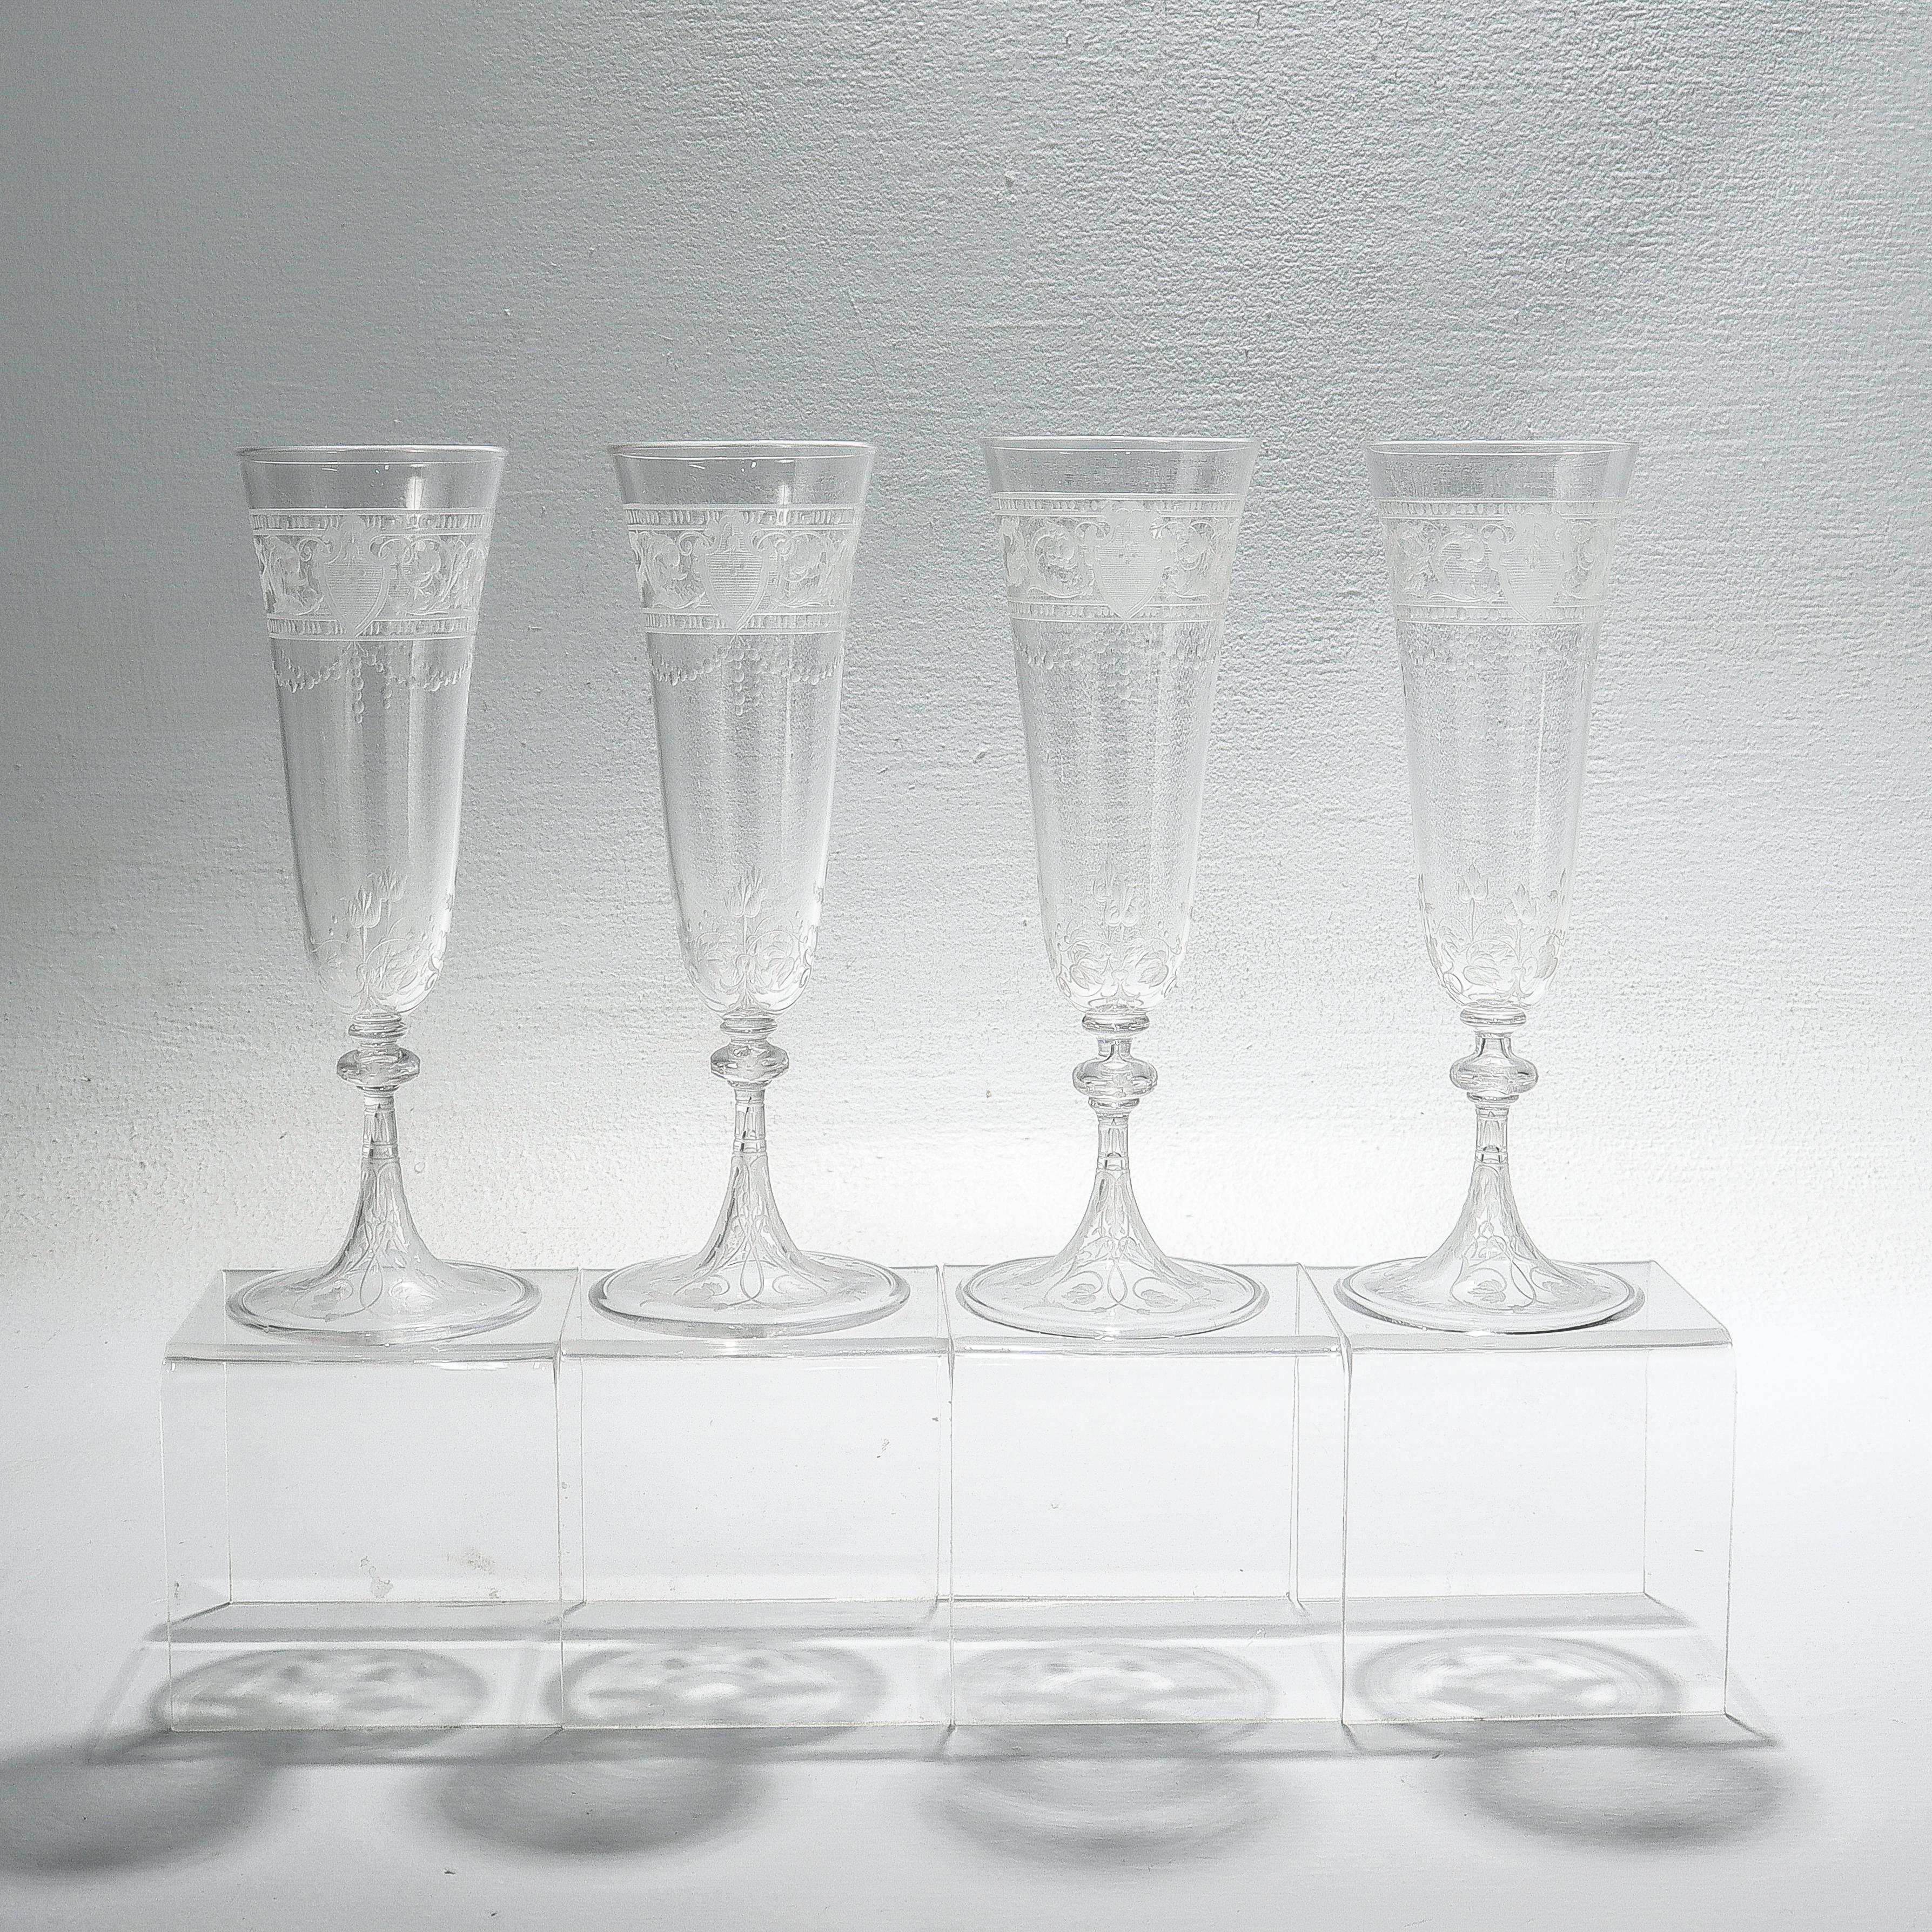 A fine set of 12 antique etched and engraved glass champagne flutes.

Attributed to Stevens & Williams or Webb.

With engraved & etched designs trelliswork, flowers, and shield devices.

Simply a wonderful set of English art glass